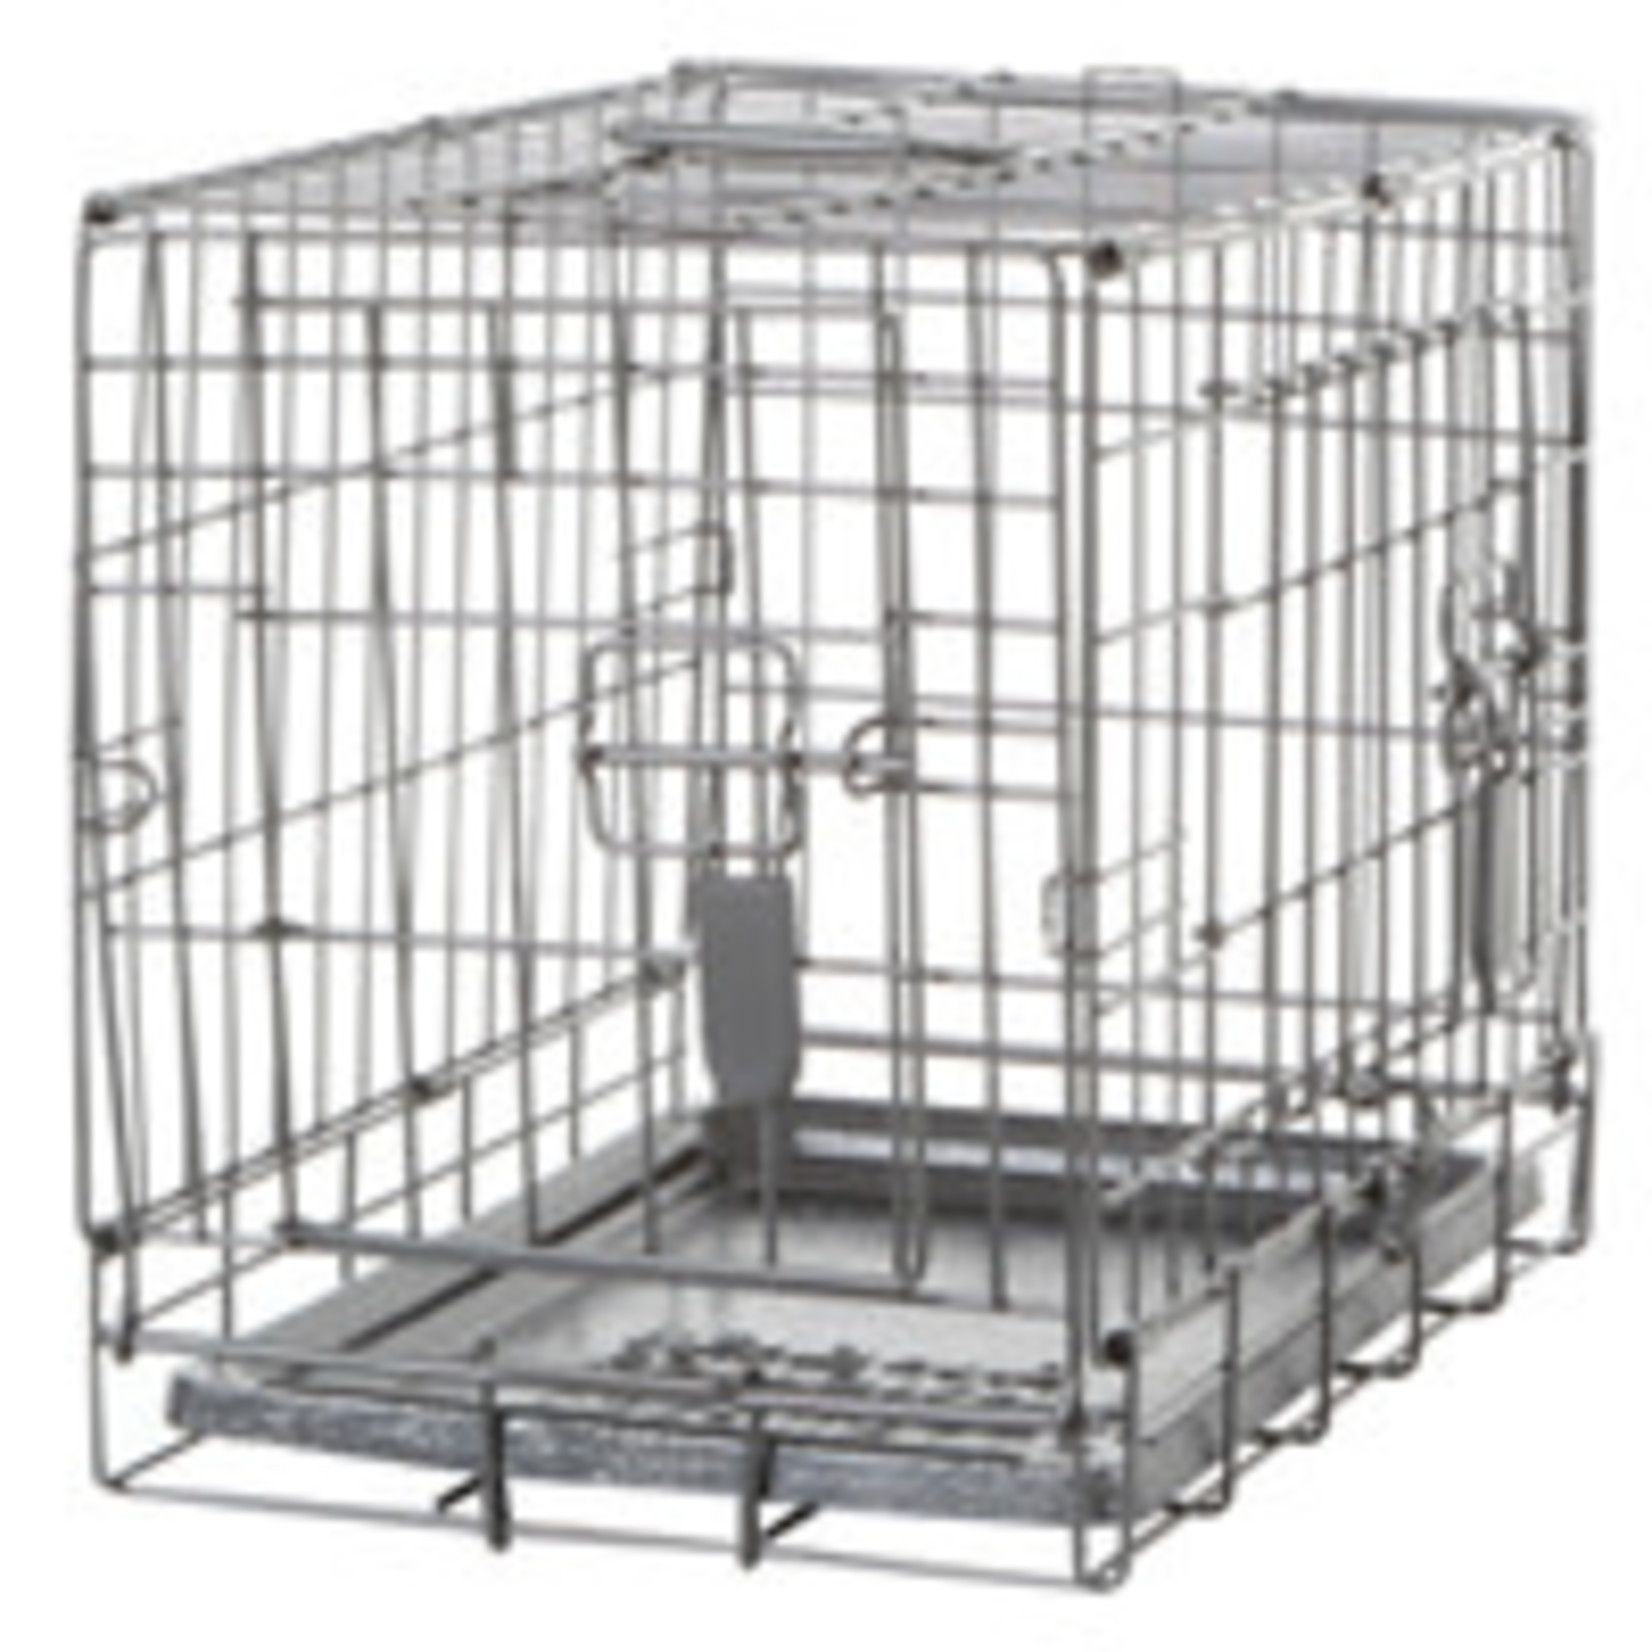 Dogit Two Door Wire Home Crates with divider - XSmall - 46.5 x 31 x 37 cm (18.2 x 12 x 14.5 in)